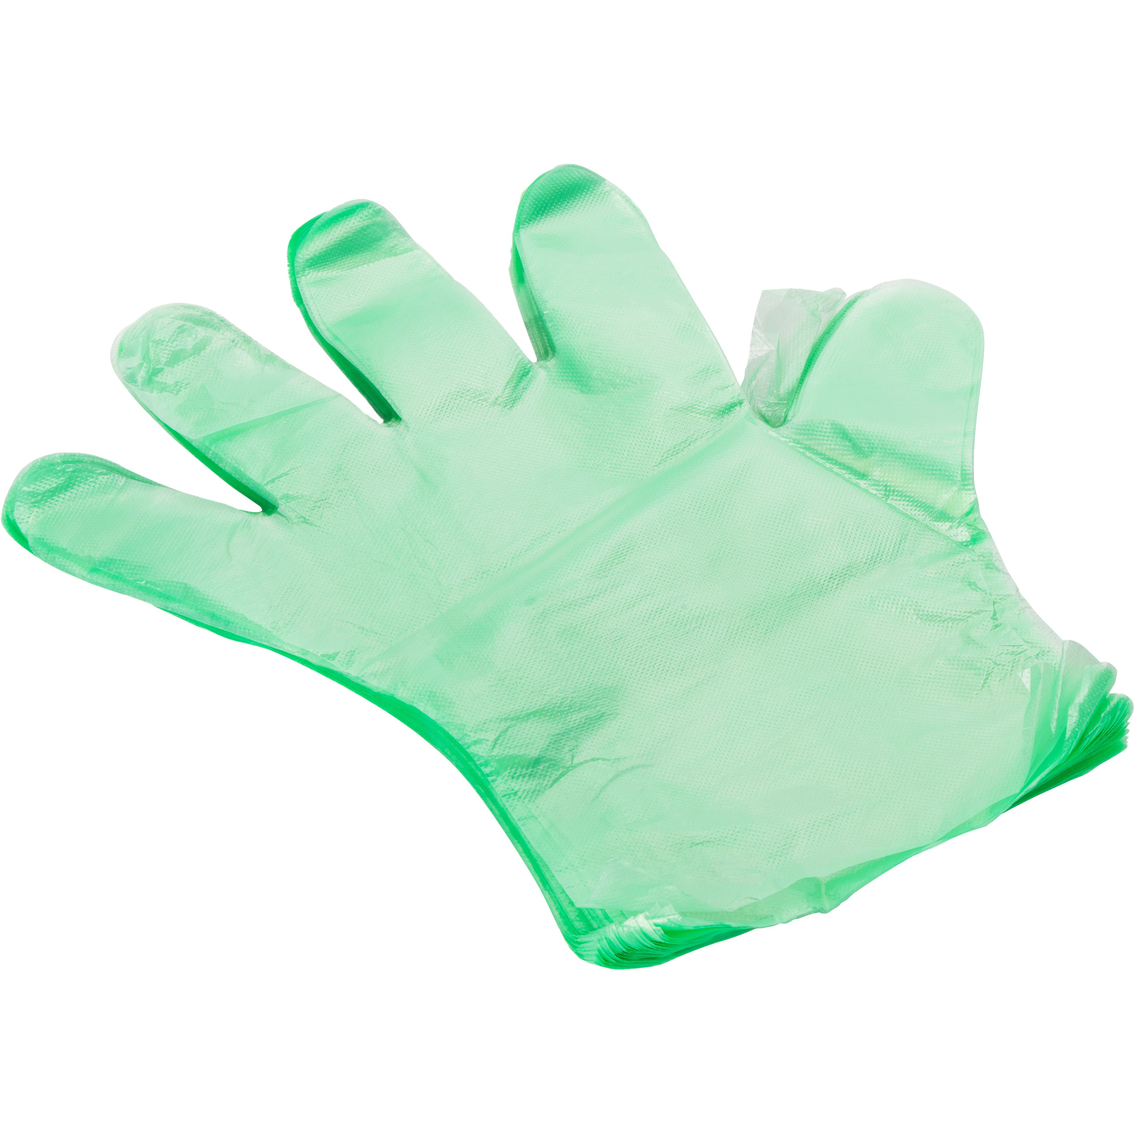 Camco RV Sanitation Disposable Gloves, 100 ct. - Image 3 of 4